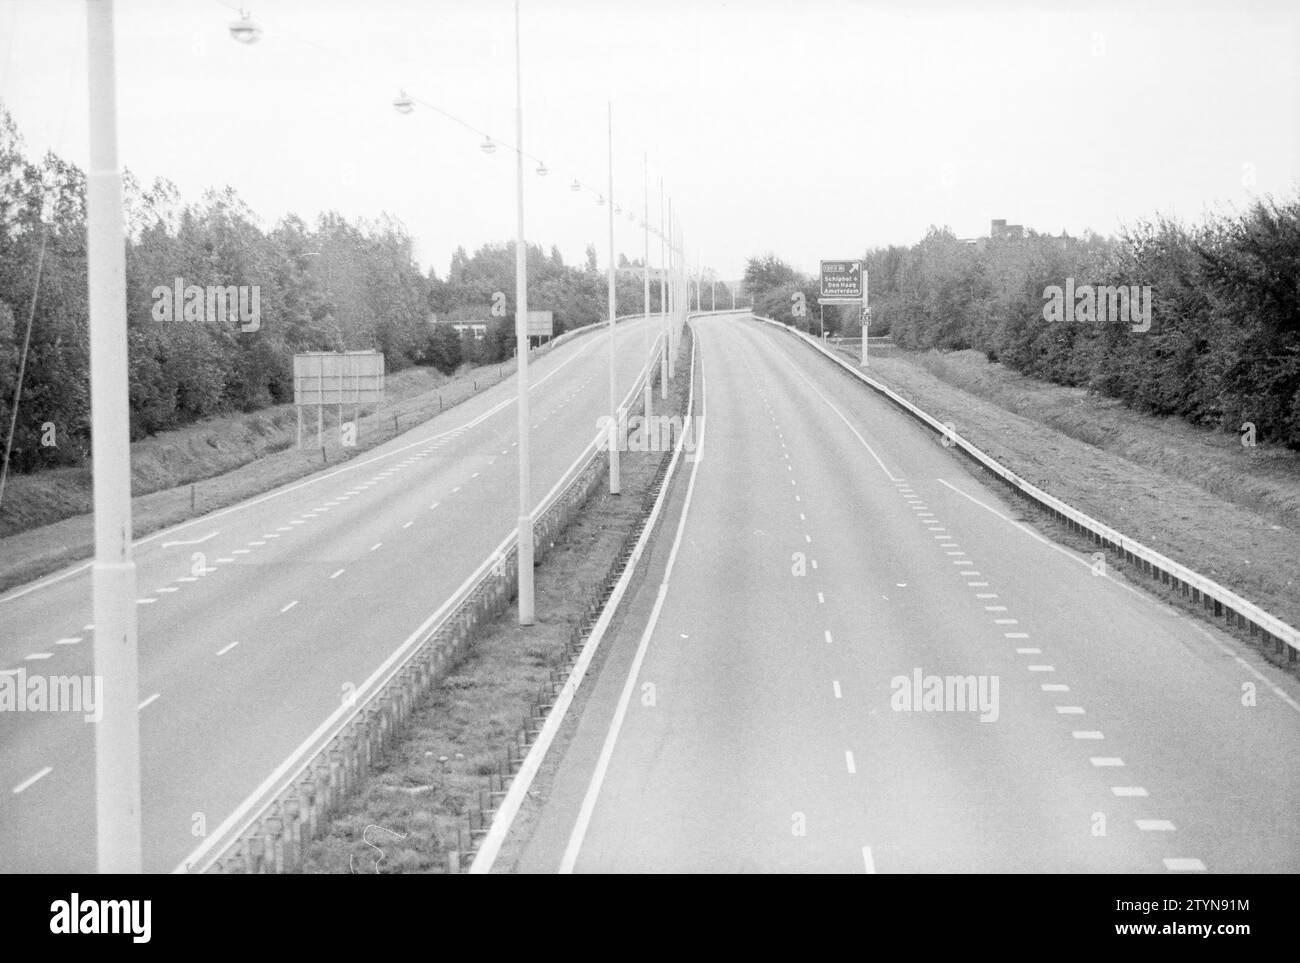 Empty four-lane access road to A4, 16-10-1978, Whizgle News from the Past, Tailored for the Future. Explore historical narratives, Dutch The Netherlands agency image with a modern perspective, bridging the gap between yesterday's events and tomorrow's insights. A timeless journey shaping the stories that shape our future. Stock Photo